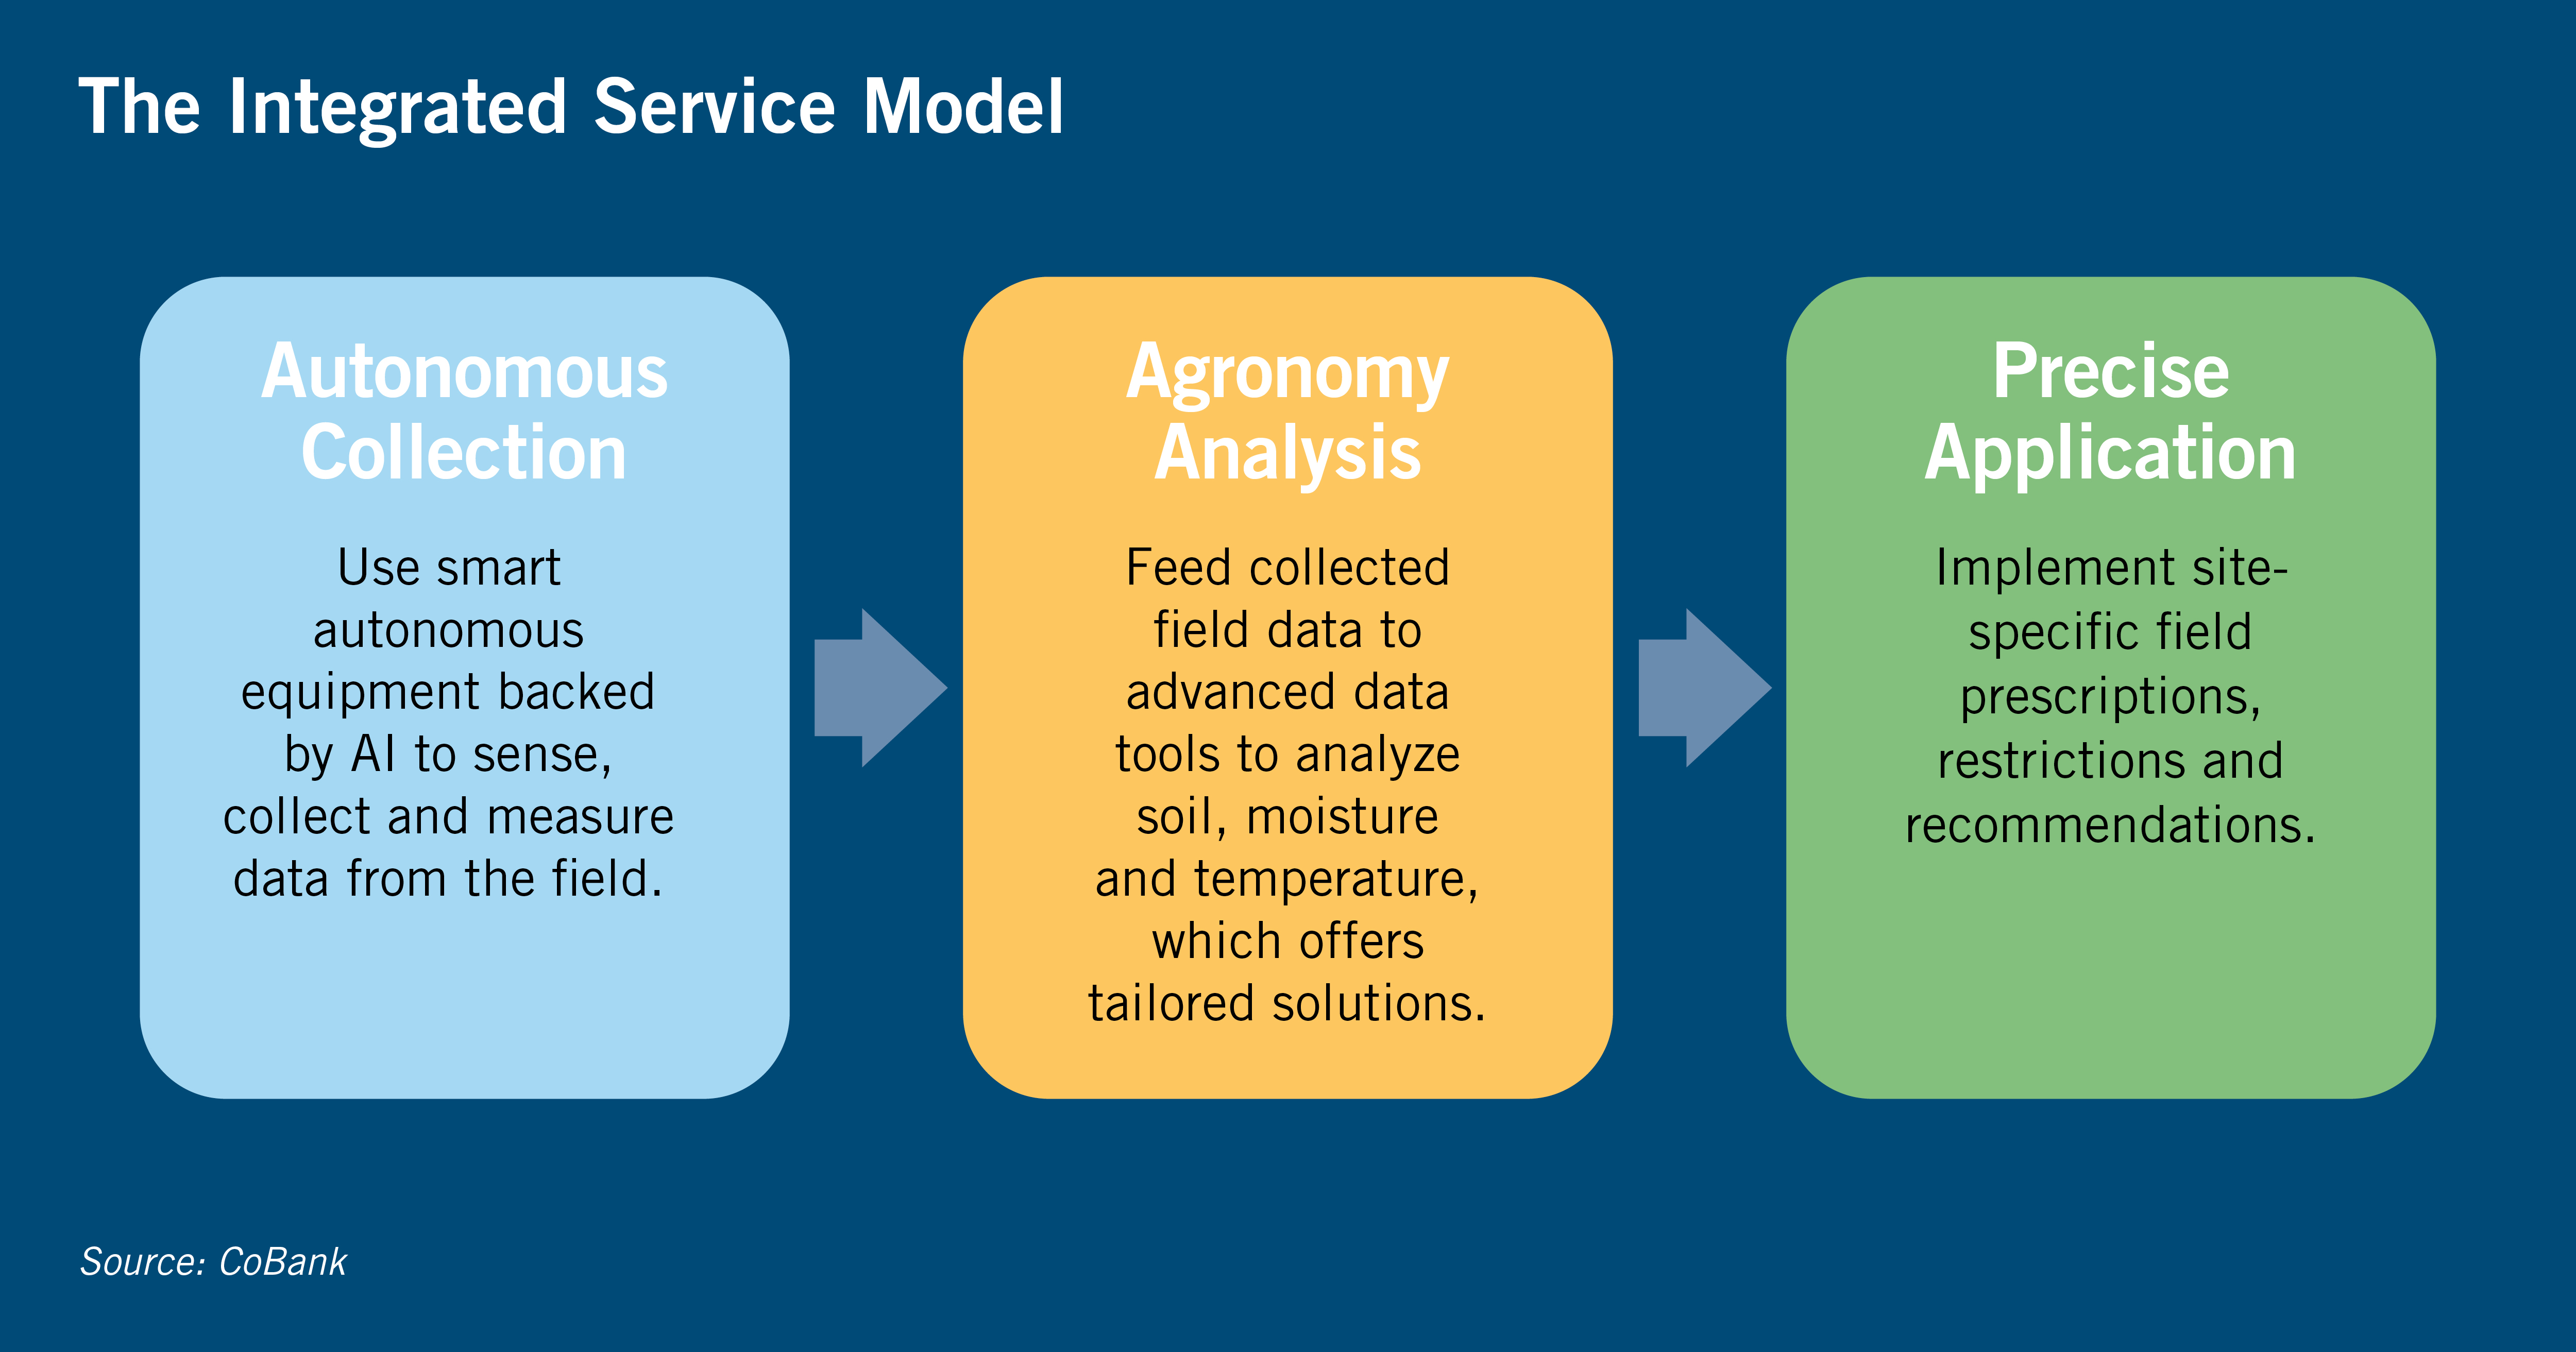 The Integrated Service Model